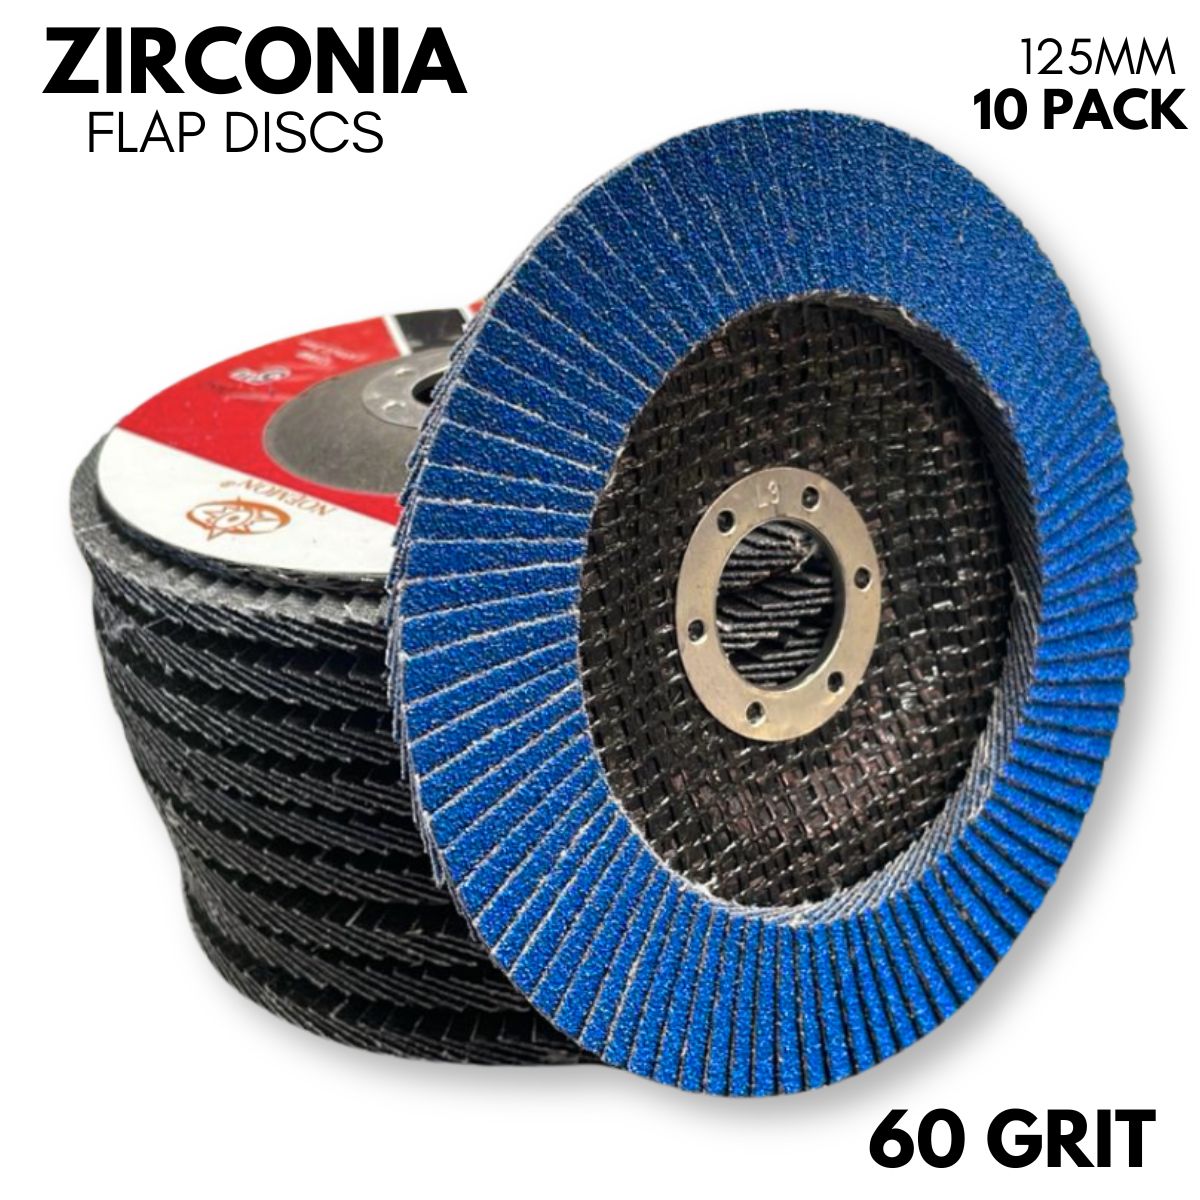 10 Pack | 125mm (5”) Flap Discs | 60 GRIT Zirconia - South East Clearance Centre